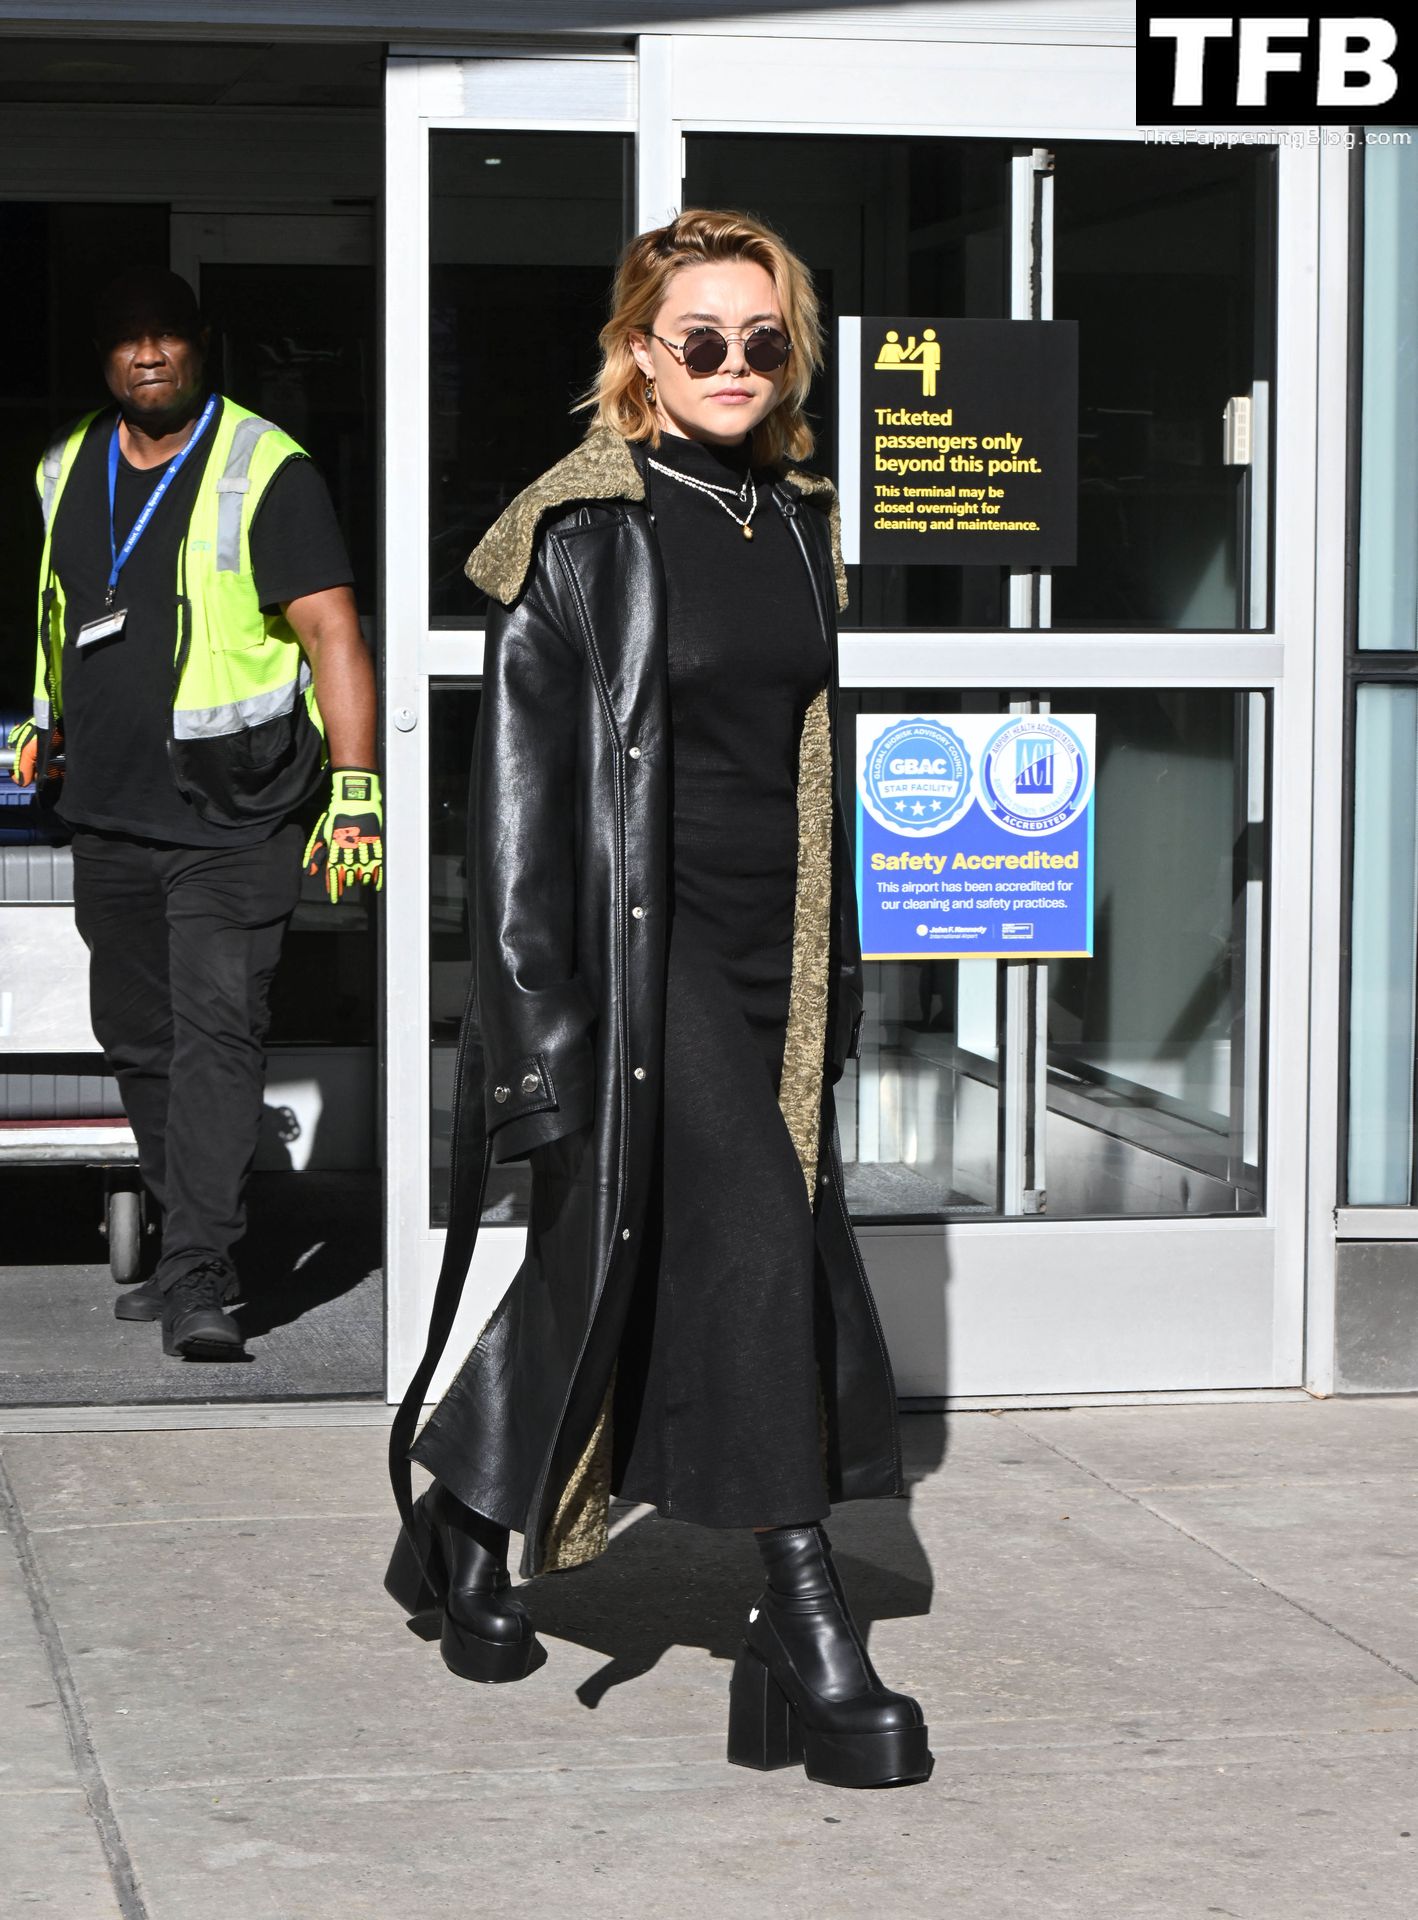 Florence Pugh Pokies The Fappening Blog 18 - Florence Pugh Shows Off Her Pokies at JFK airport in NYC (31 Photos)